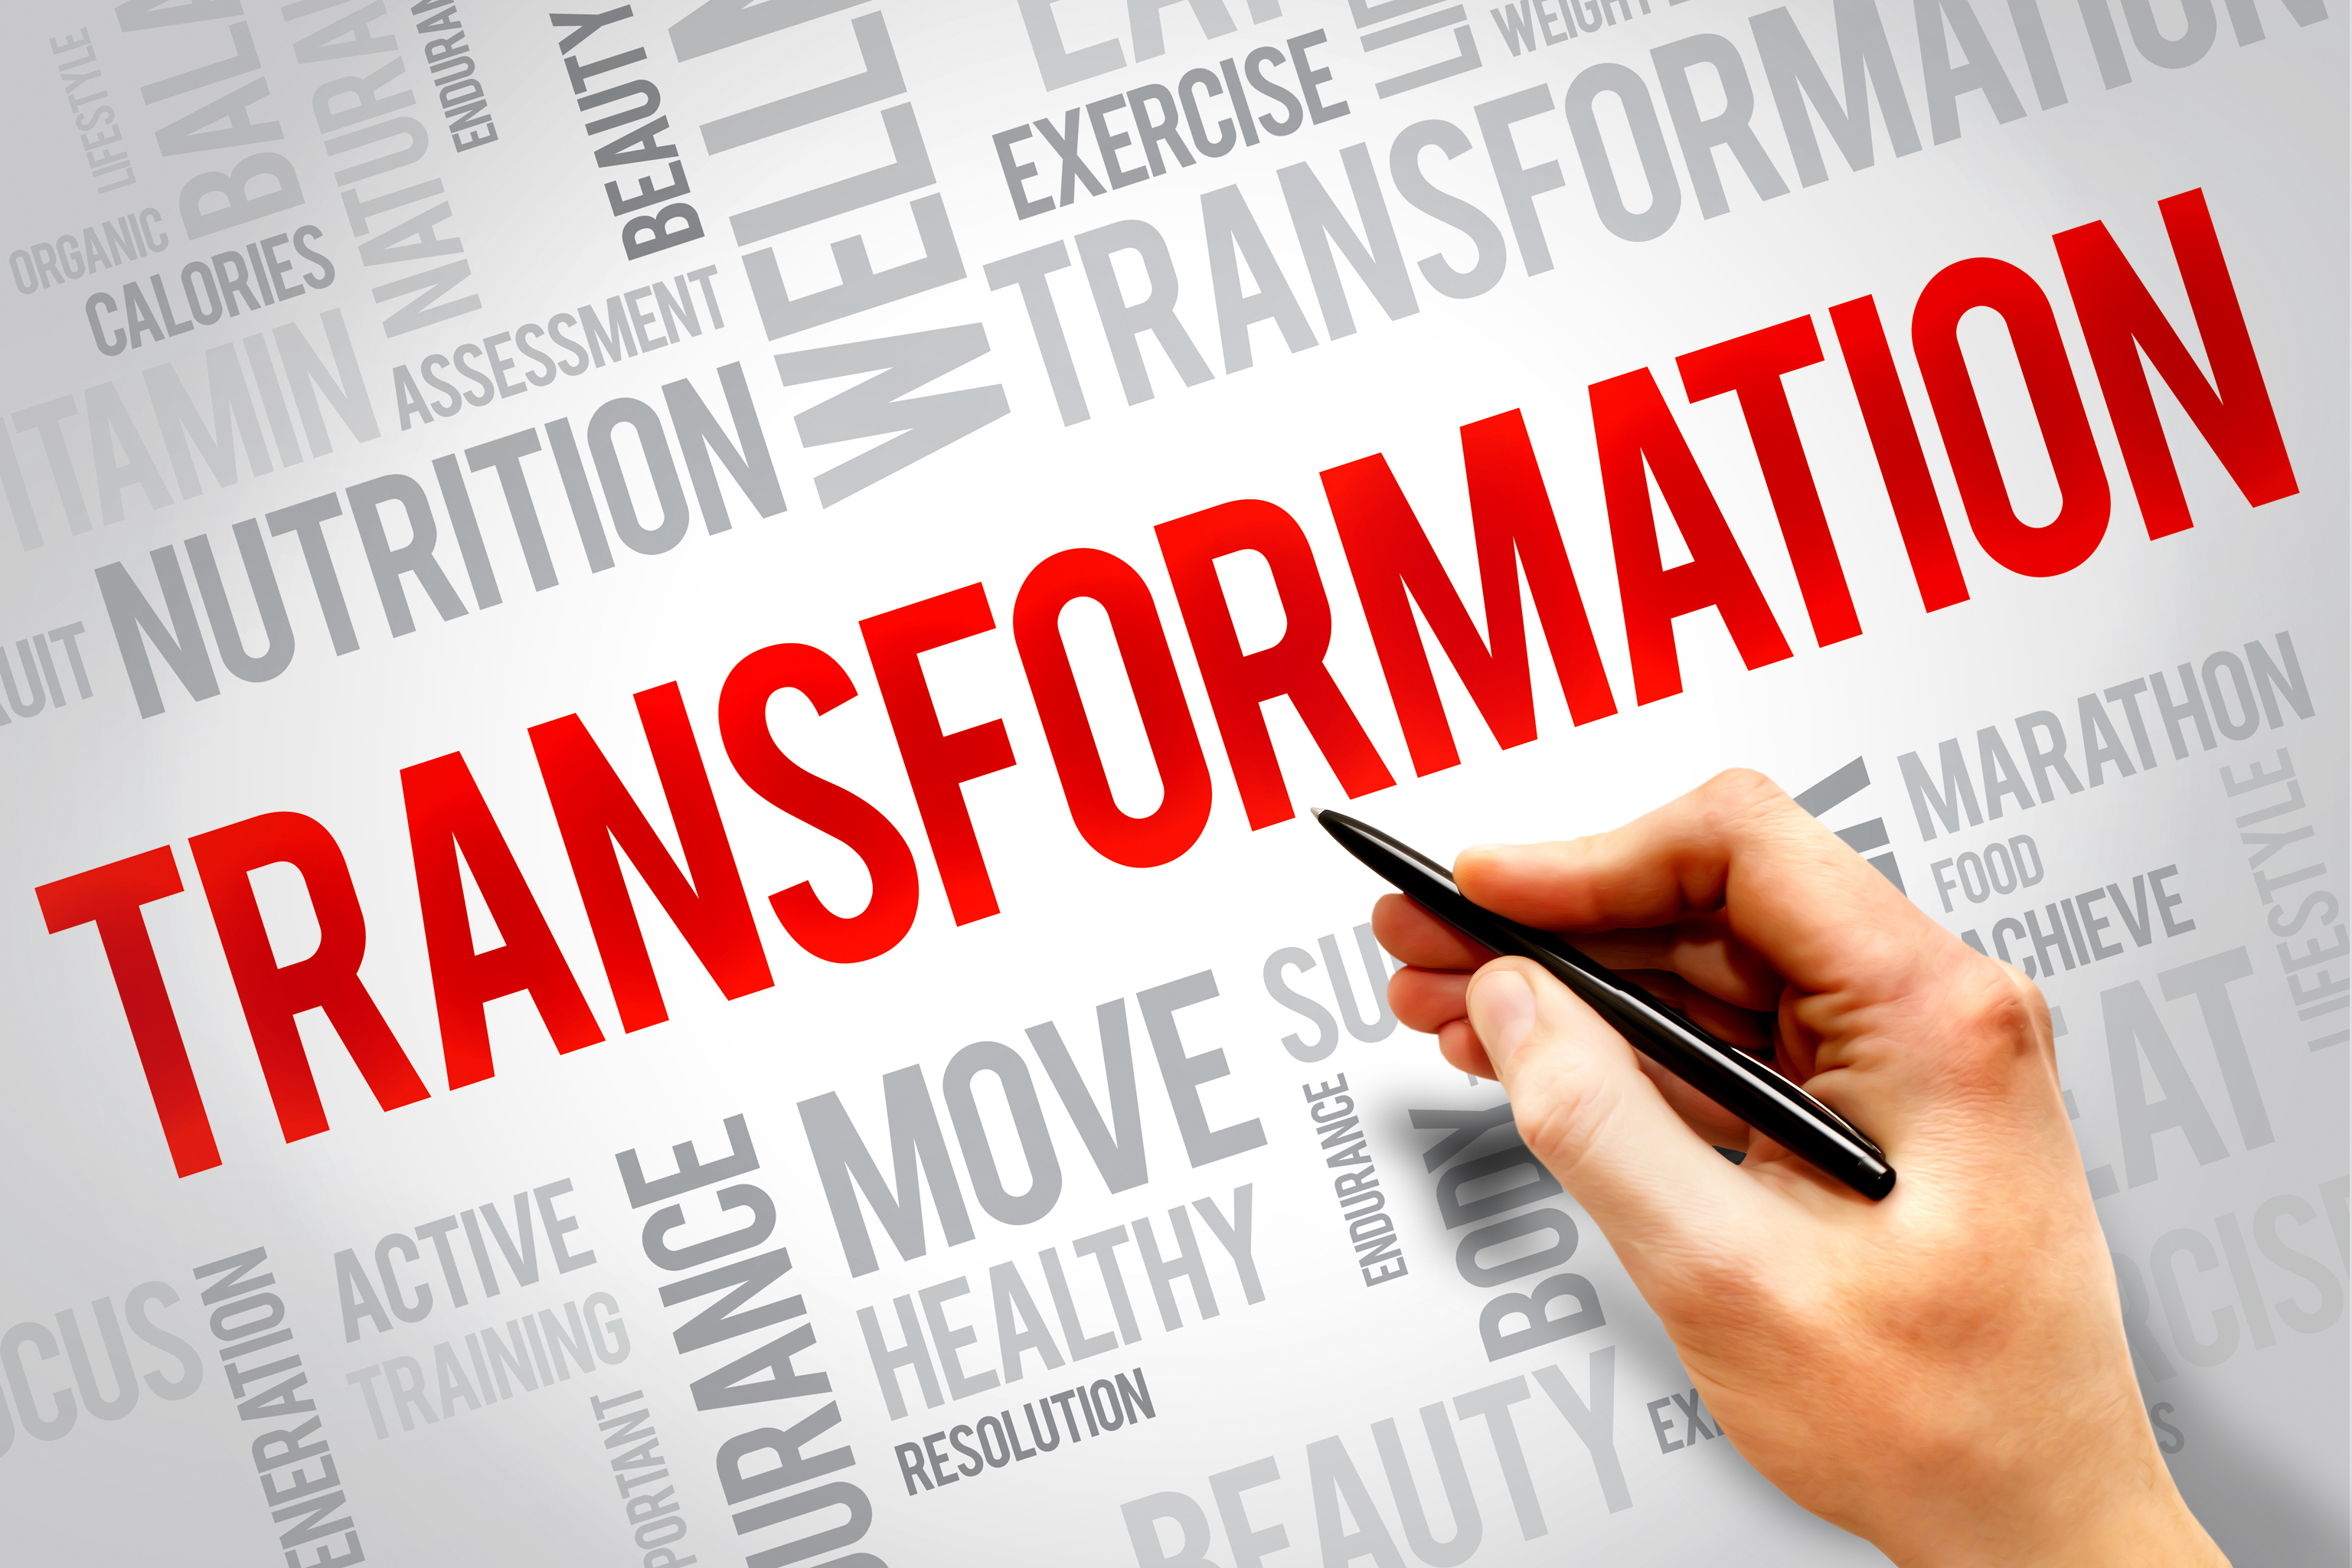 word cloud featuring the word: transformation